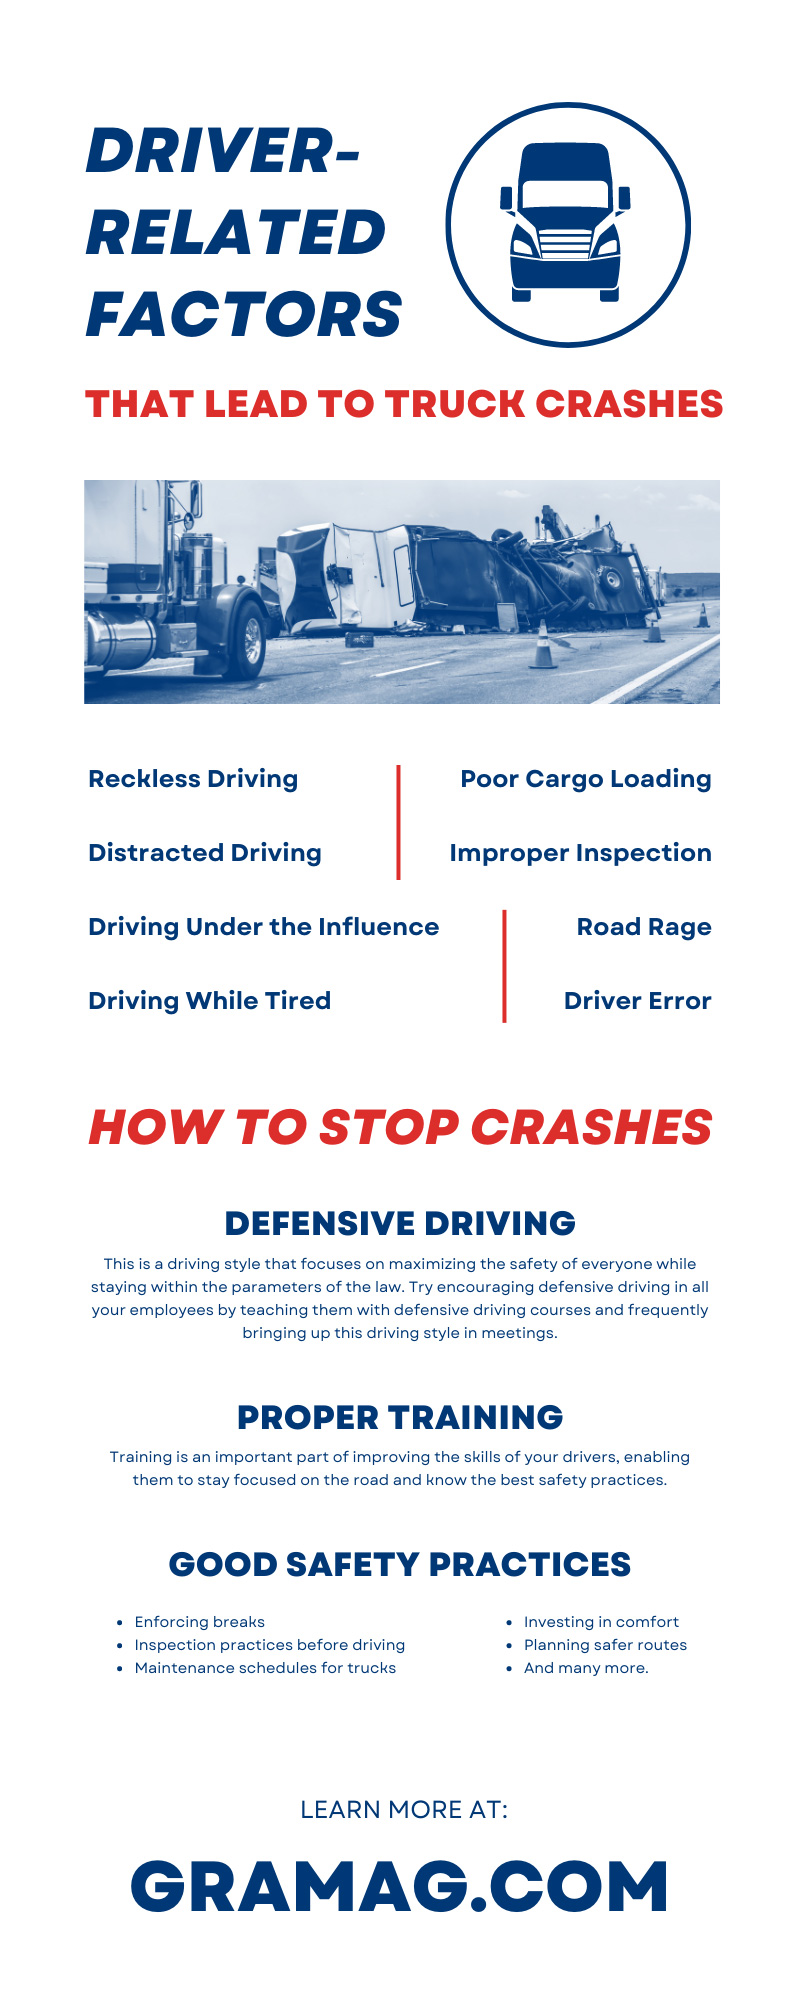 Driver-Related Factors That Lead to Truck Crashes